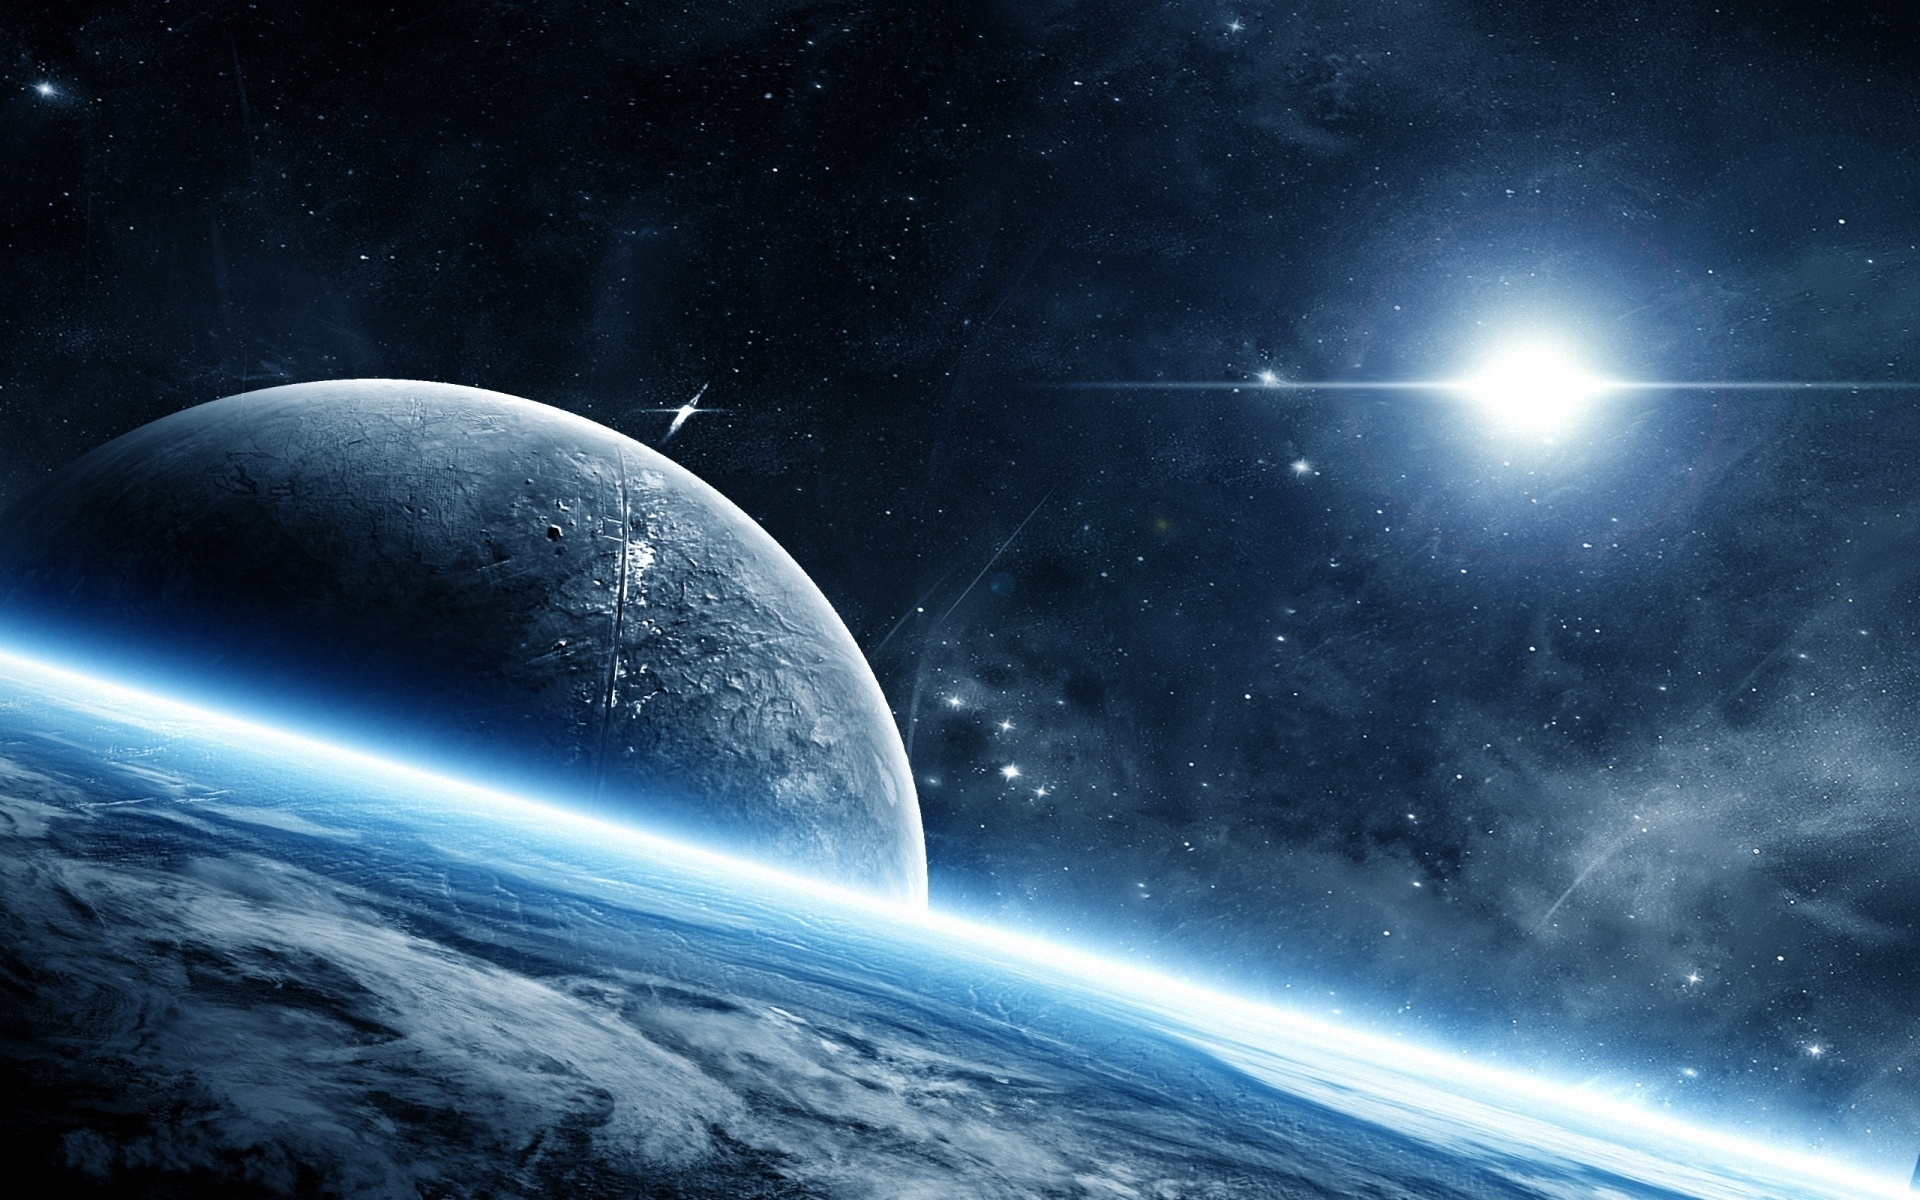 Free Download Pics Photos Space Planets Space Wallpaper Search 1920x1200 For Your Desktop Mobile Tablet Explore 63 Space Planets Wallpaper Outer Space Wallpaper Planets Free Planets Wallpaper Planets Wallpapers Hd